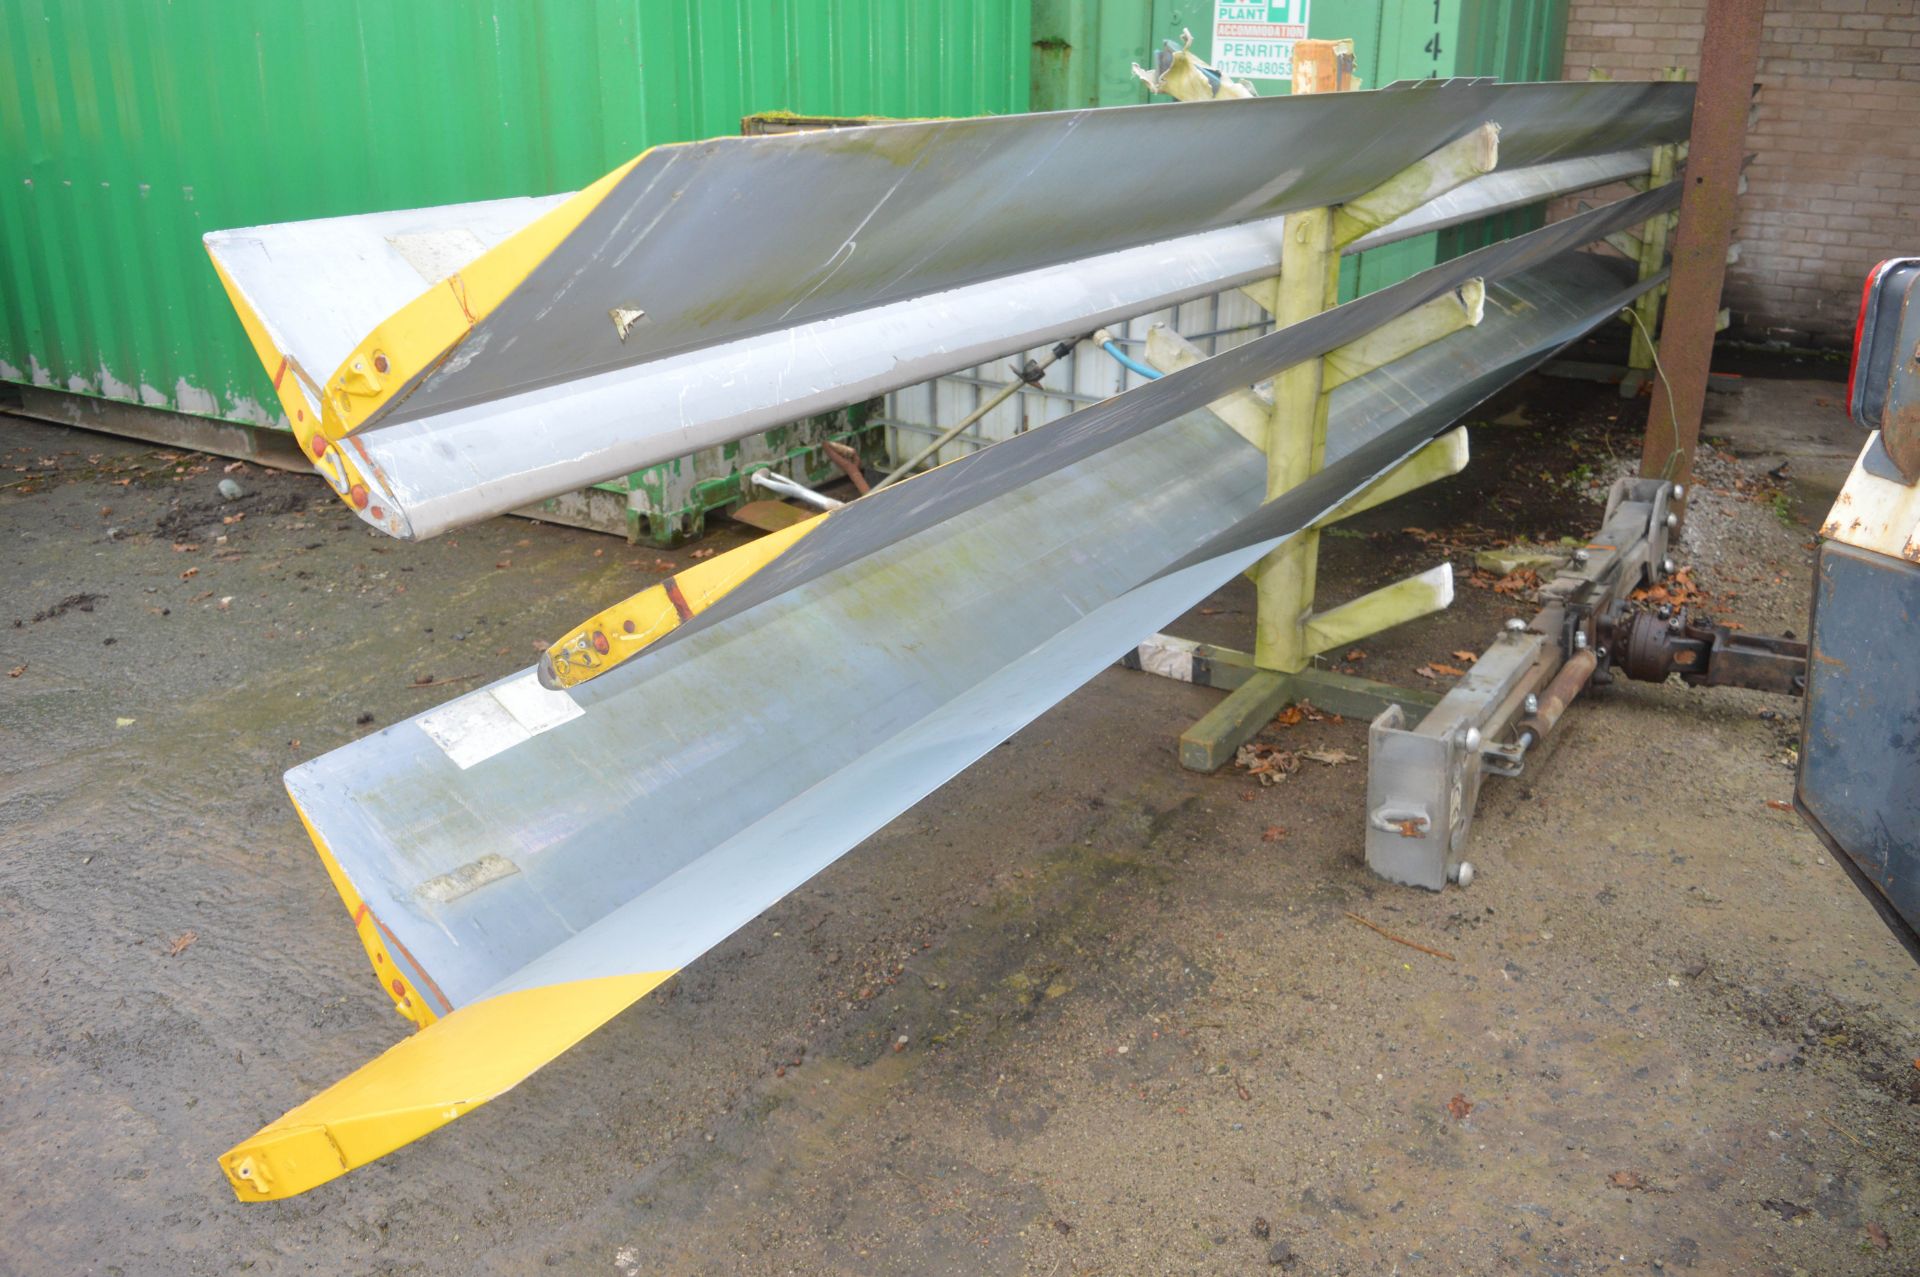 Sea King helicopter main rotor blade